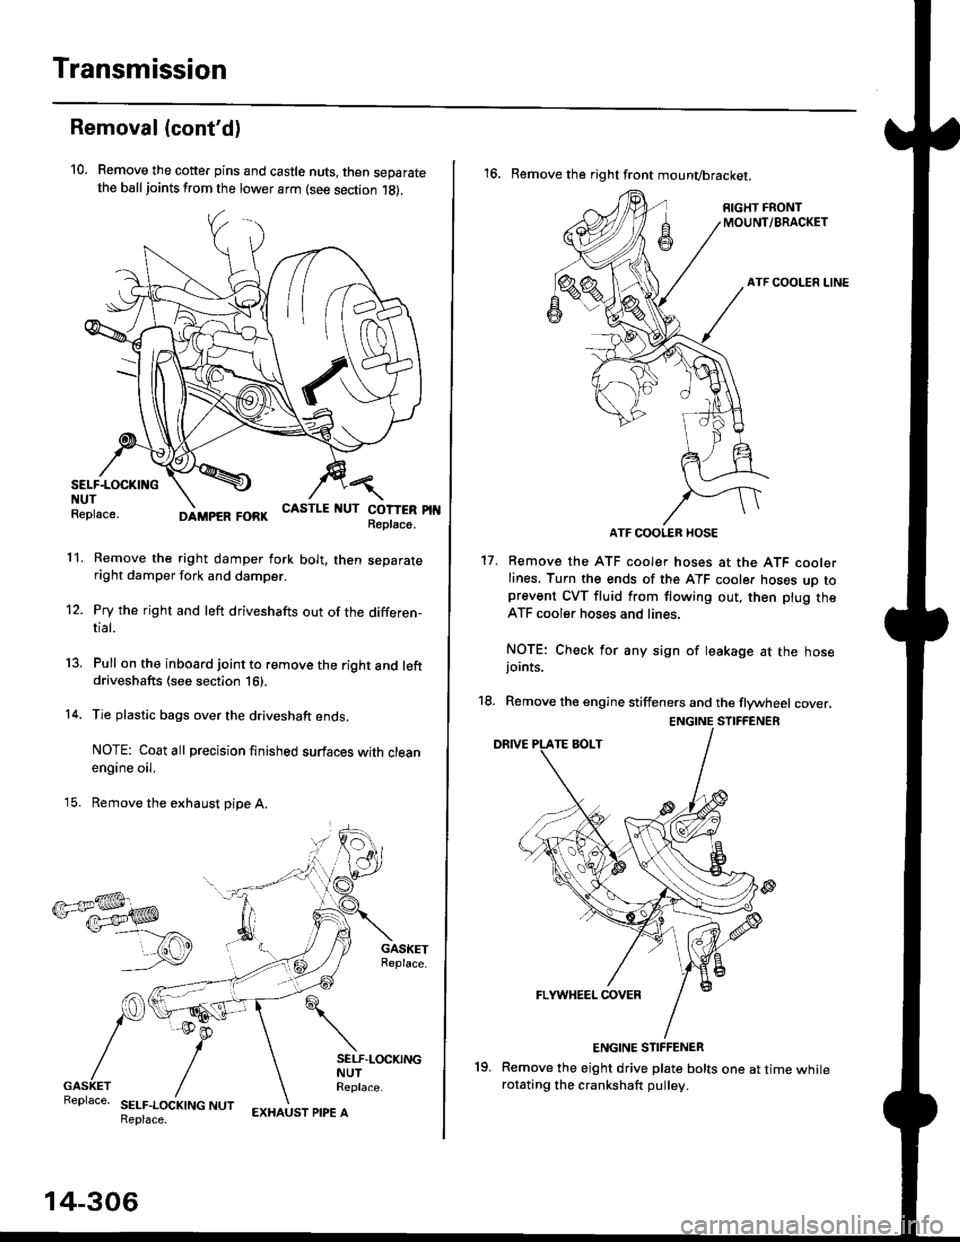 HONDA CIVIC 1997 6.G Workshop Manual Transmission
Removal (contd)
10. Remove the cotte. pins and castle nuts, then separatethe ball joints from the lower arm (see section 1g).
SELF-LOCKING  -=V,
NUT \Replace. oitupea rOax
Remove the rig